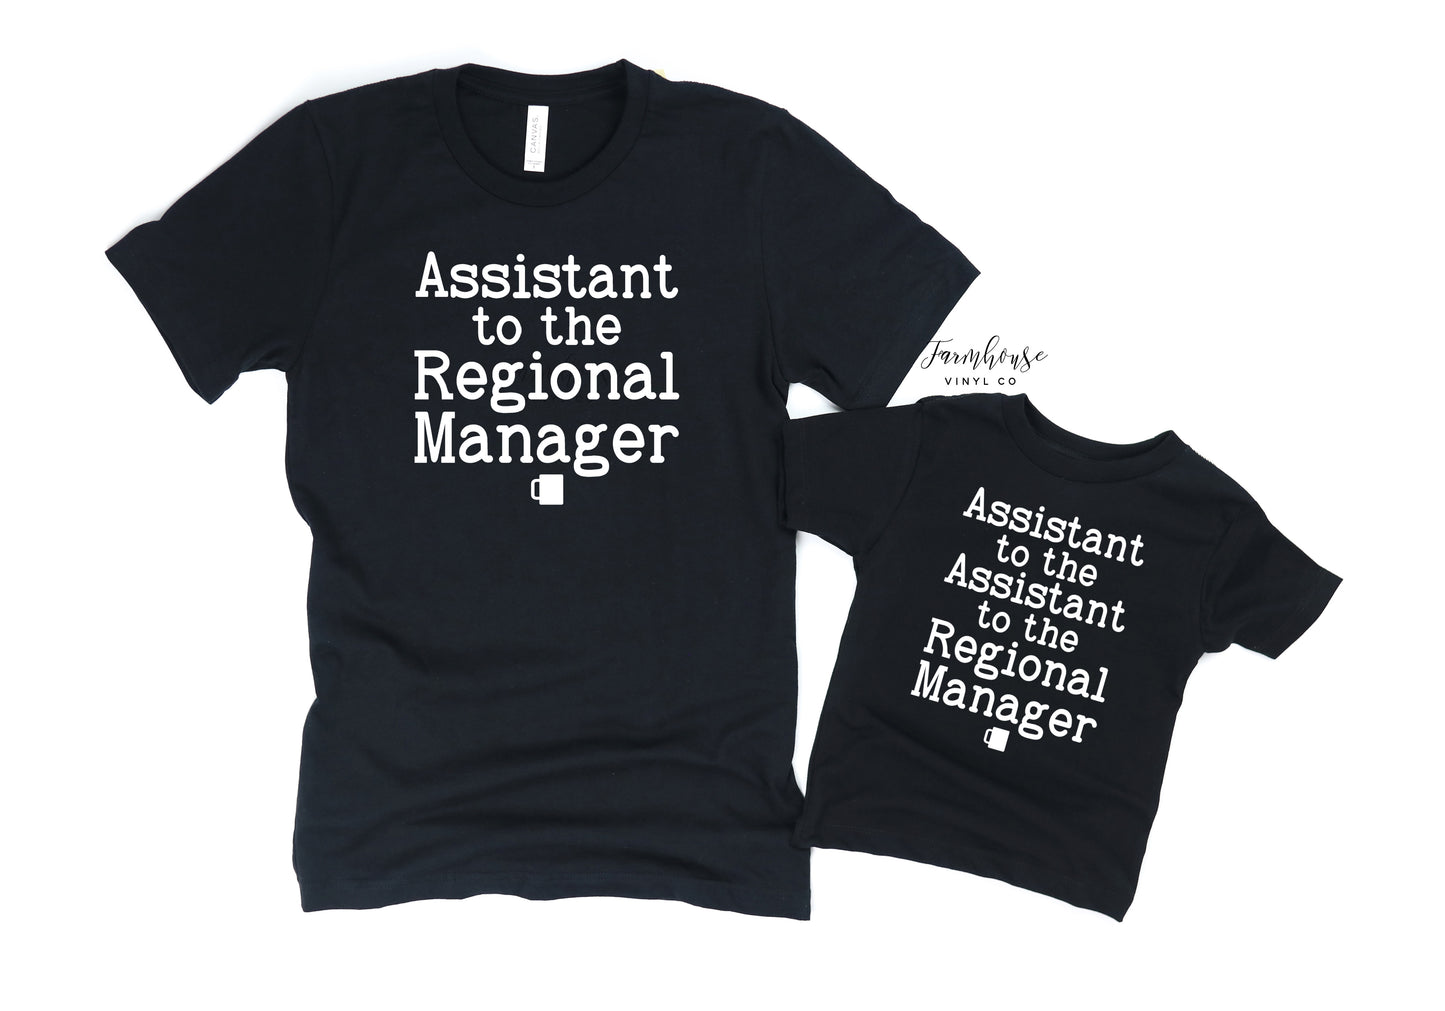 Assistant to the Regional Manager Shirt Set - Farmhouse Vinyl Co